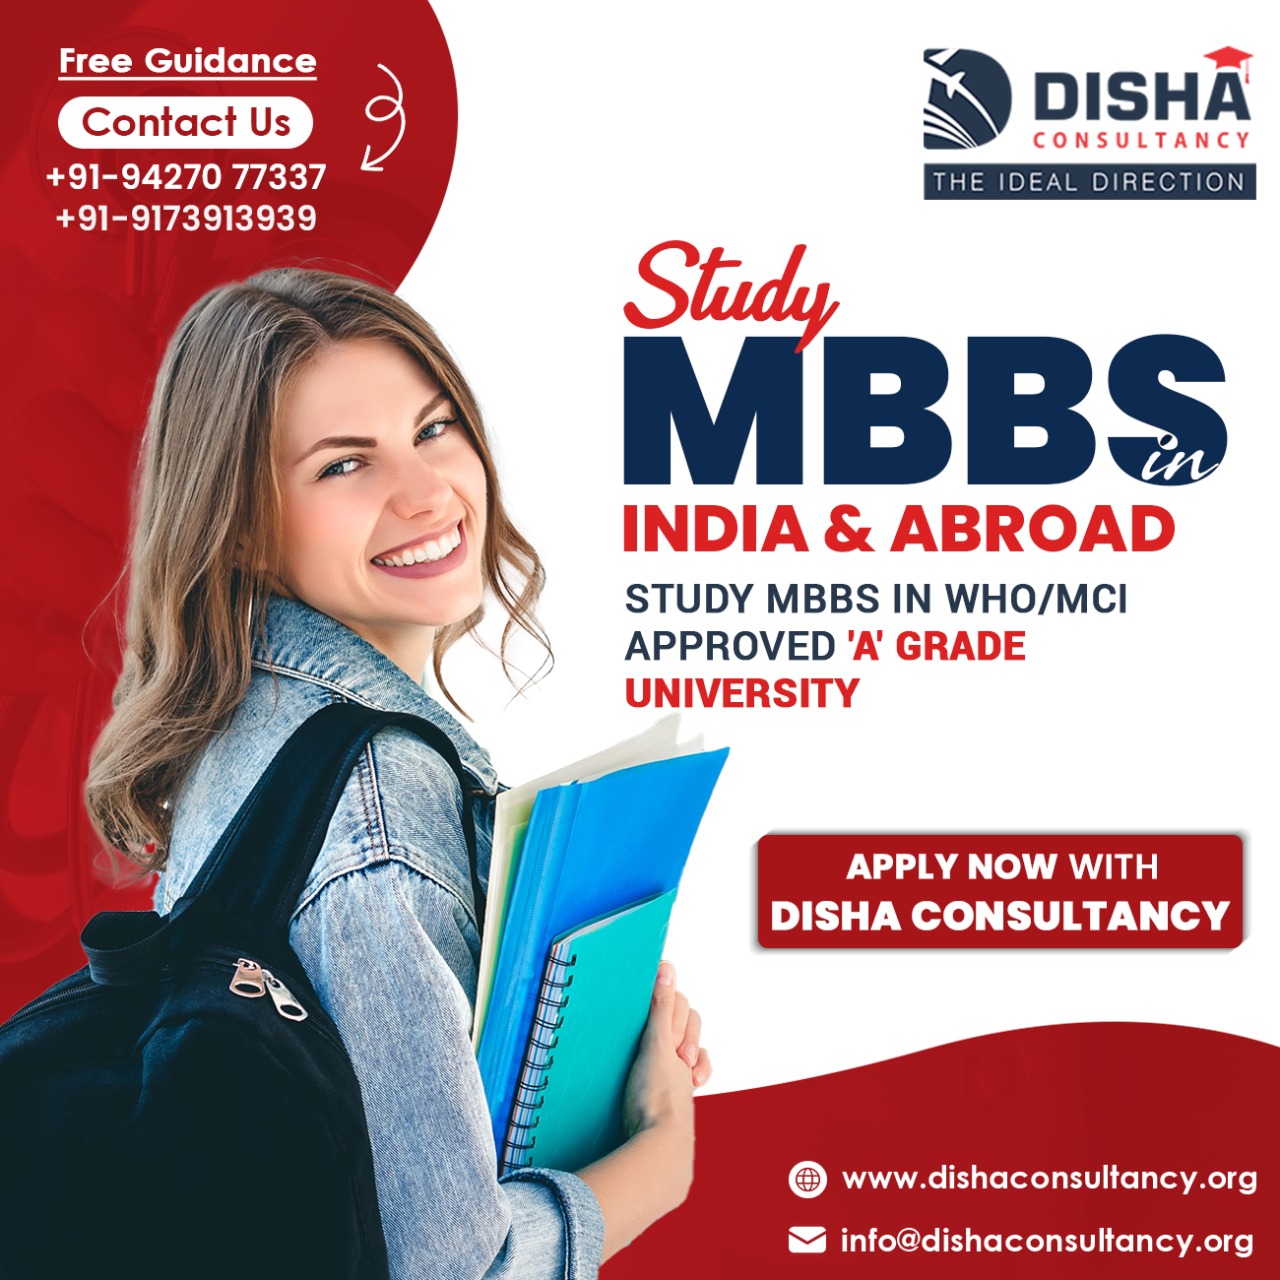 Free Guidance D I S HA
Contact Us J CONSULTANCY
+91-94270 77337

+91-9173913939

i MBBS

INDIA &amp; ABROAD

STUDY MBBS IN WHO/MCI
APPROVED 'A' GRADE
UNIVERSITY

APPLY NOW WITH
DISHA CONSULTANCY

         
   
 
      

  

THE IDEAL DIRECTION

(©) www.dishaconsultancy.org

   

©% info@dishaconsultancy.org